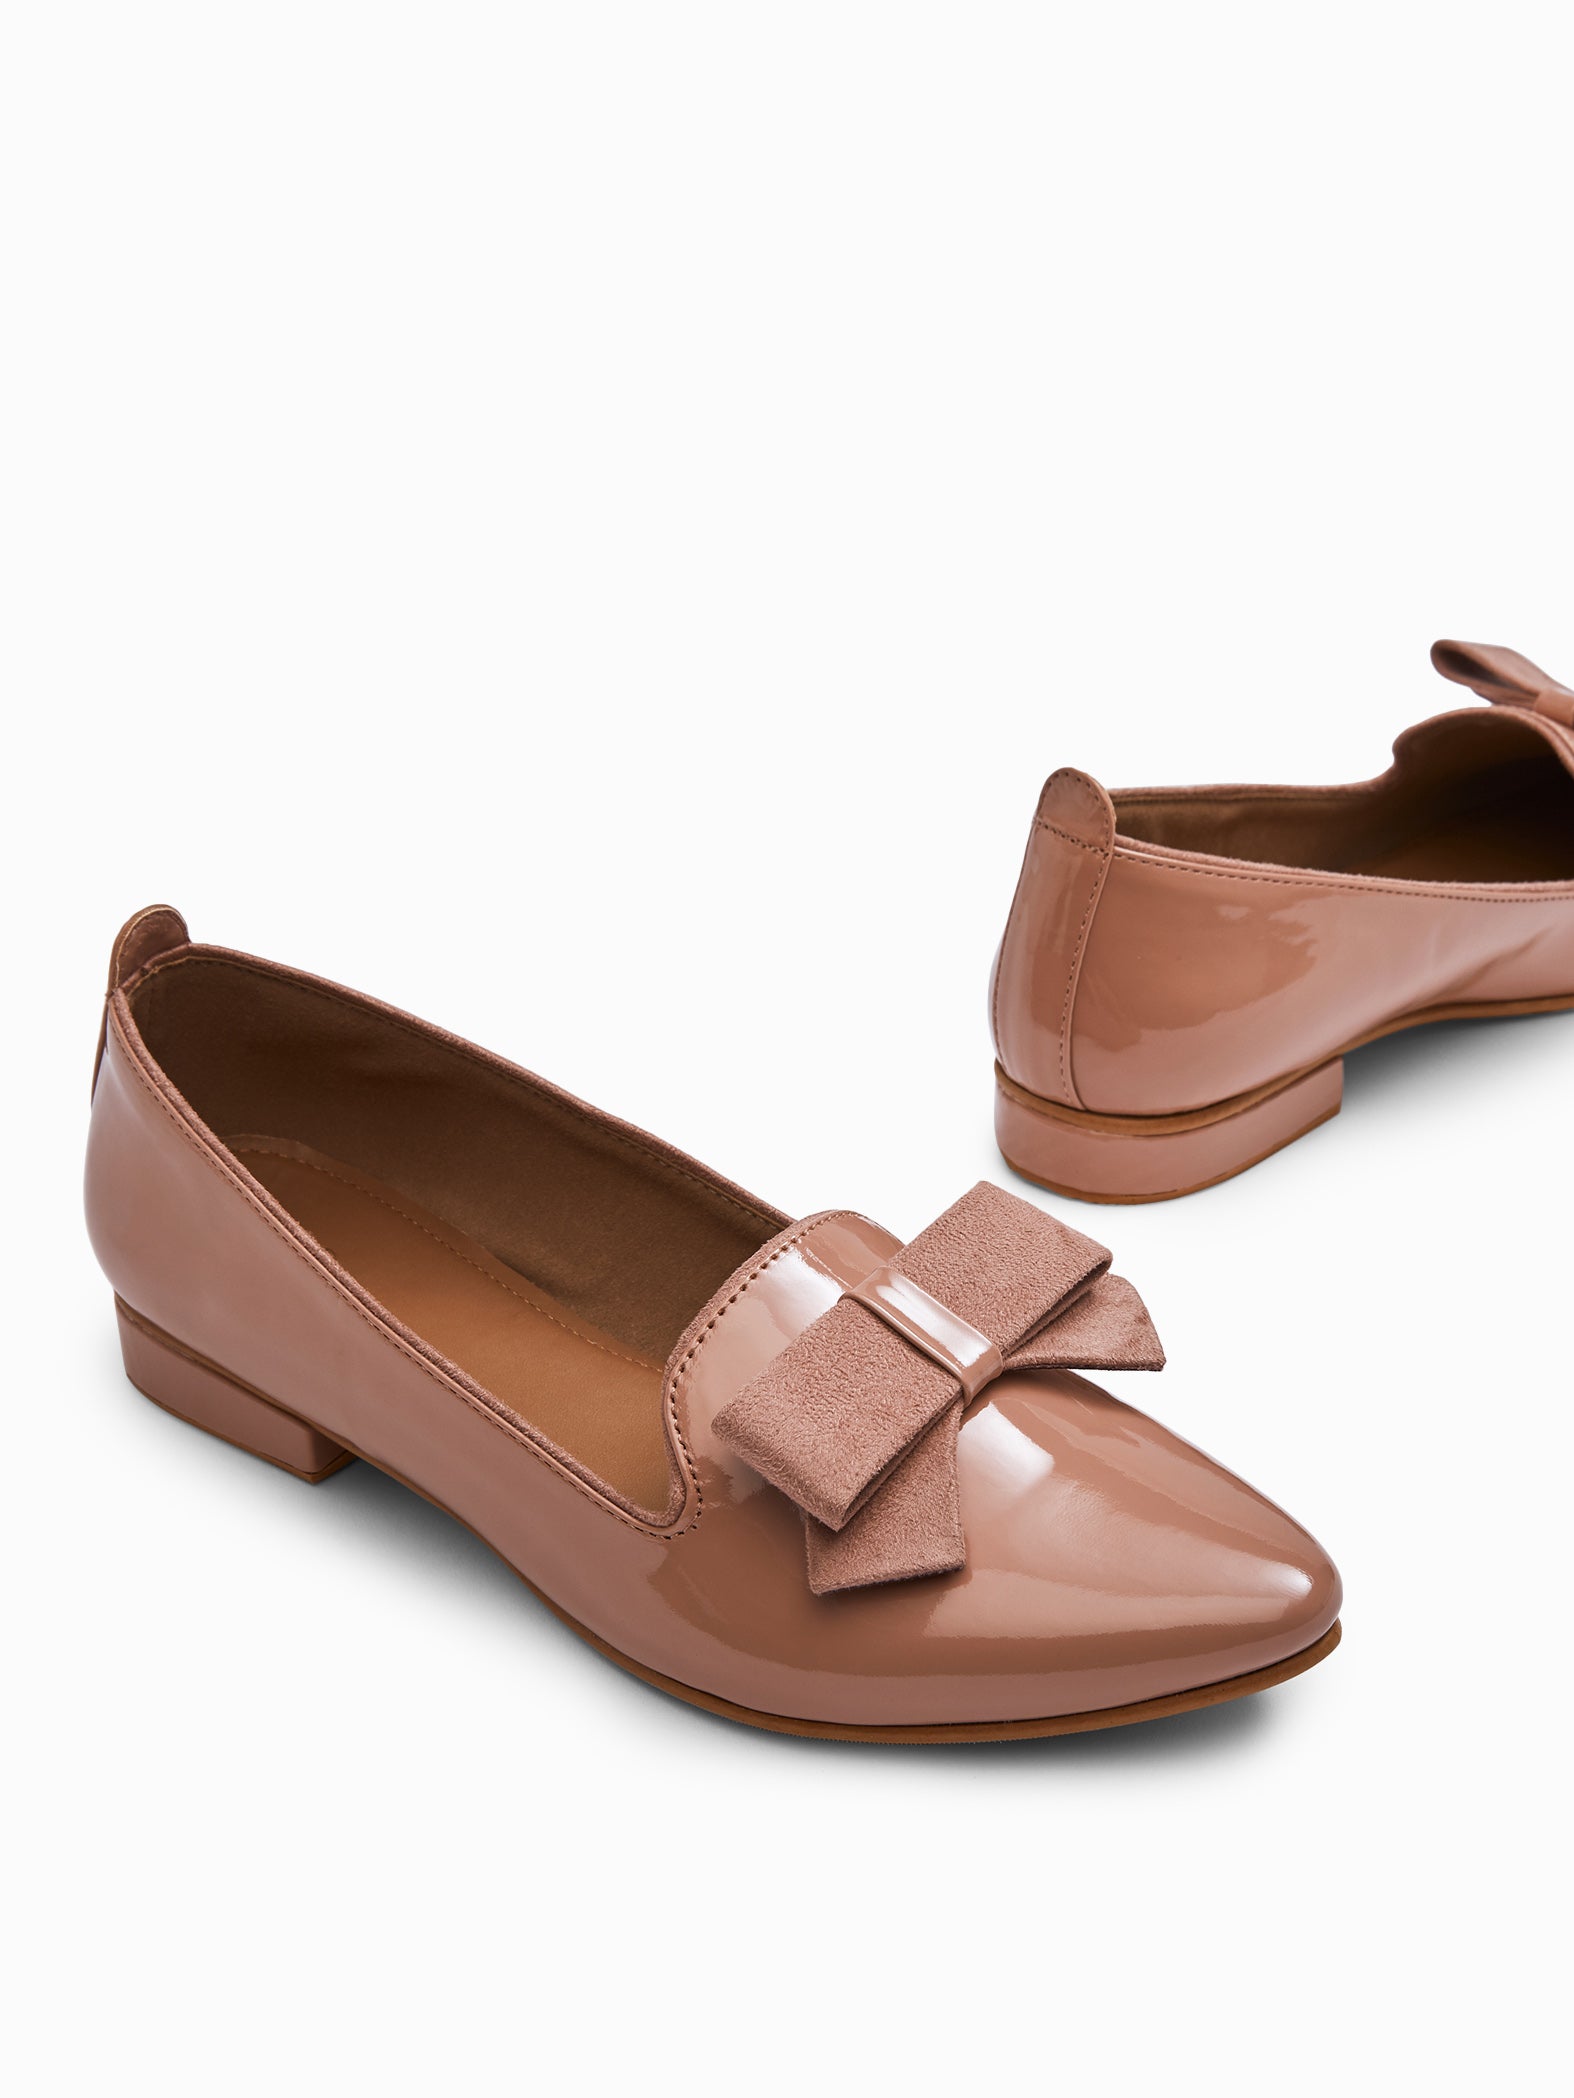 Blush Patent Bow Loafers